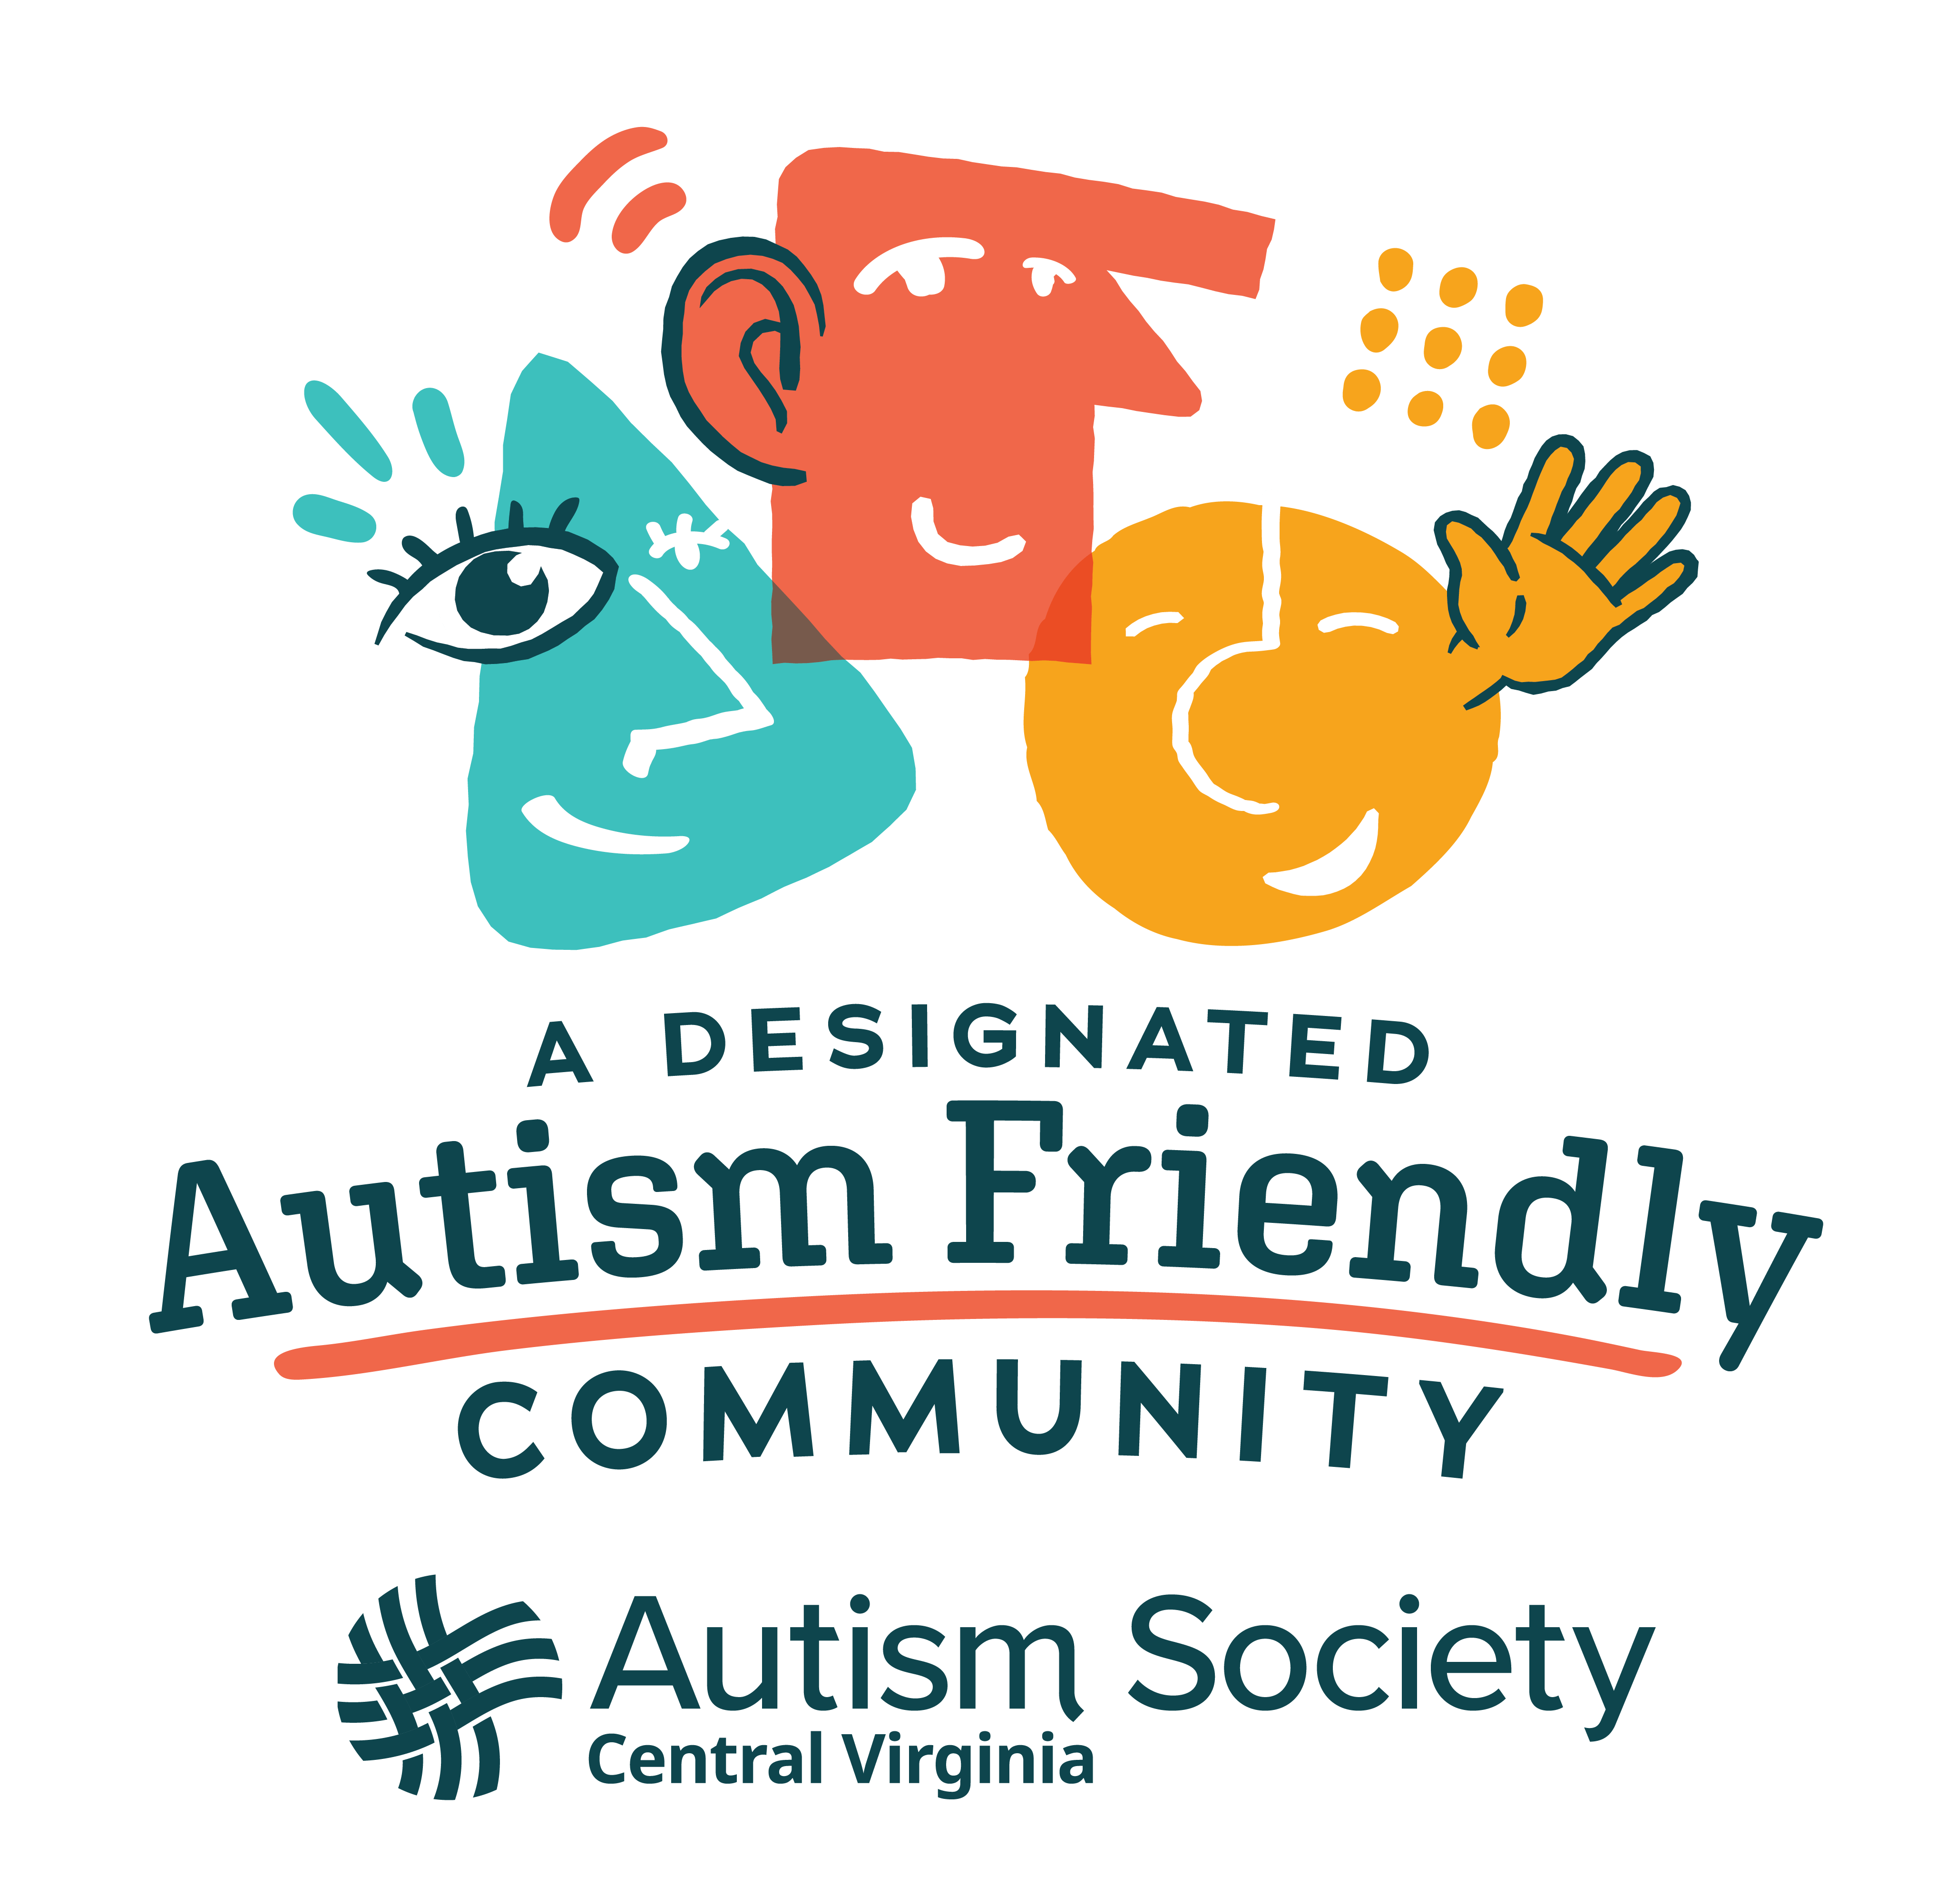 Autism Friendly
Accommodations